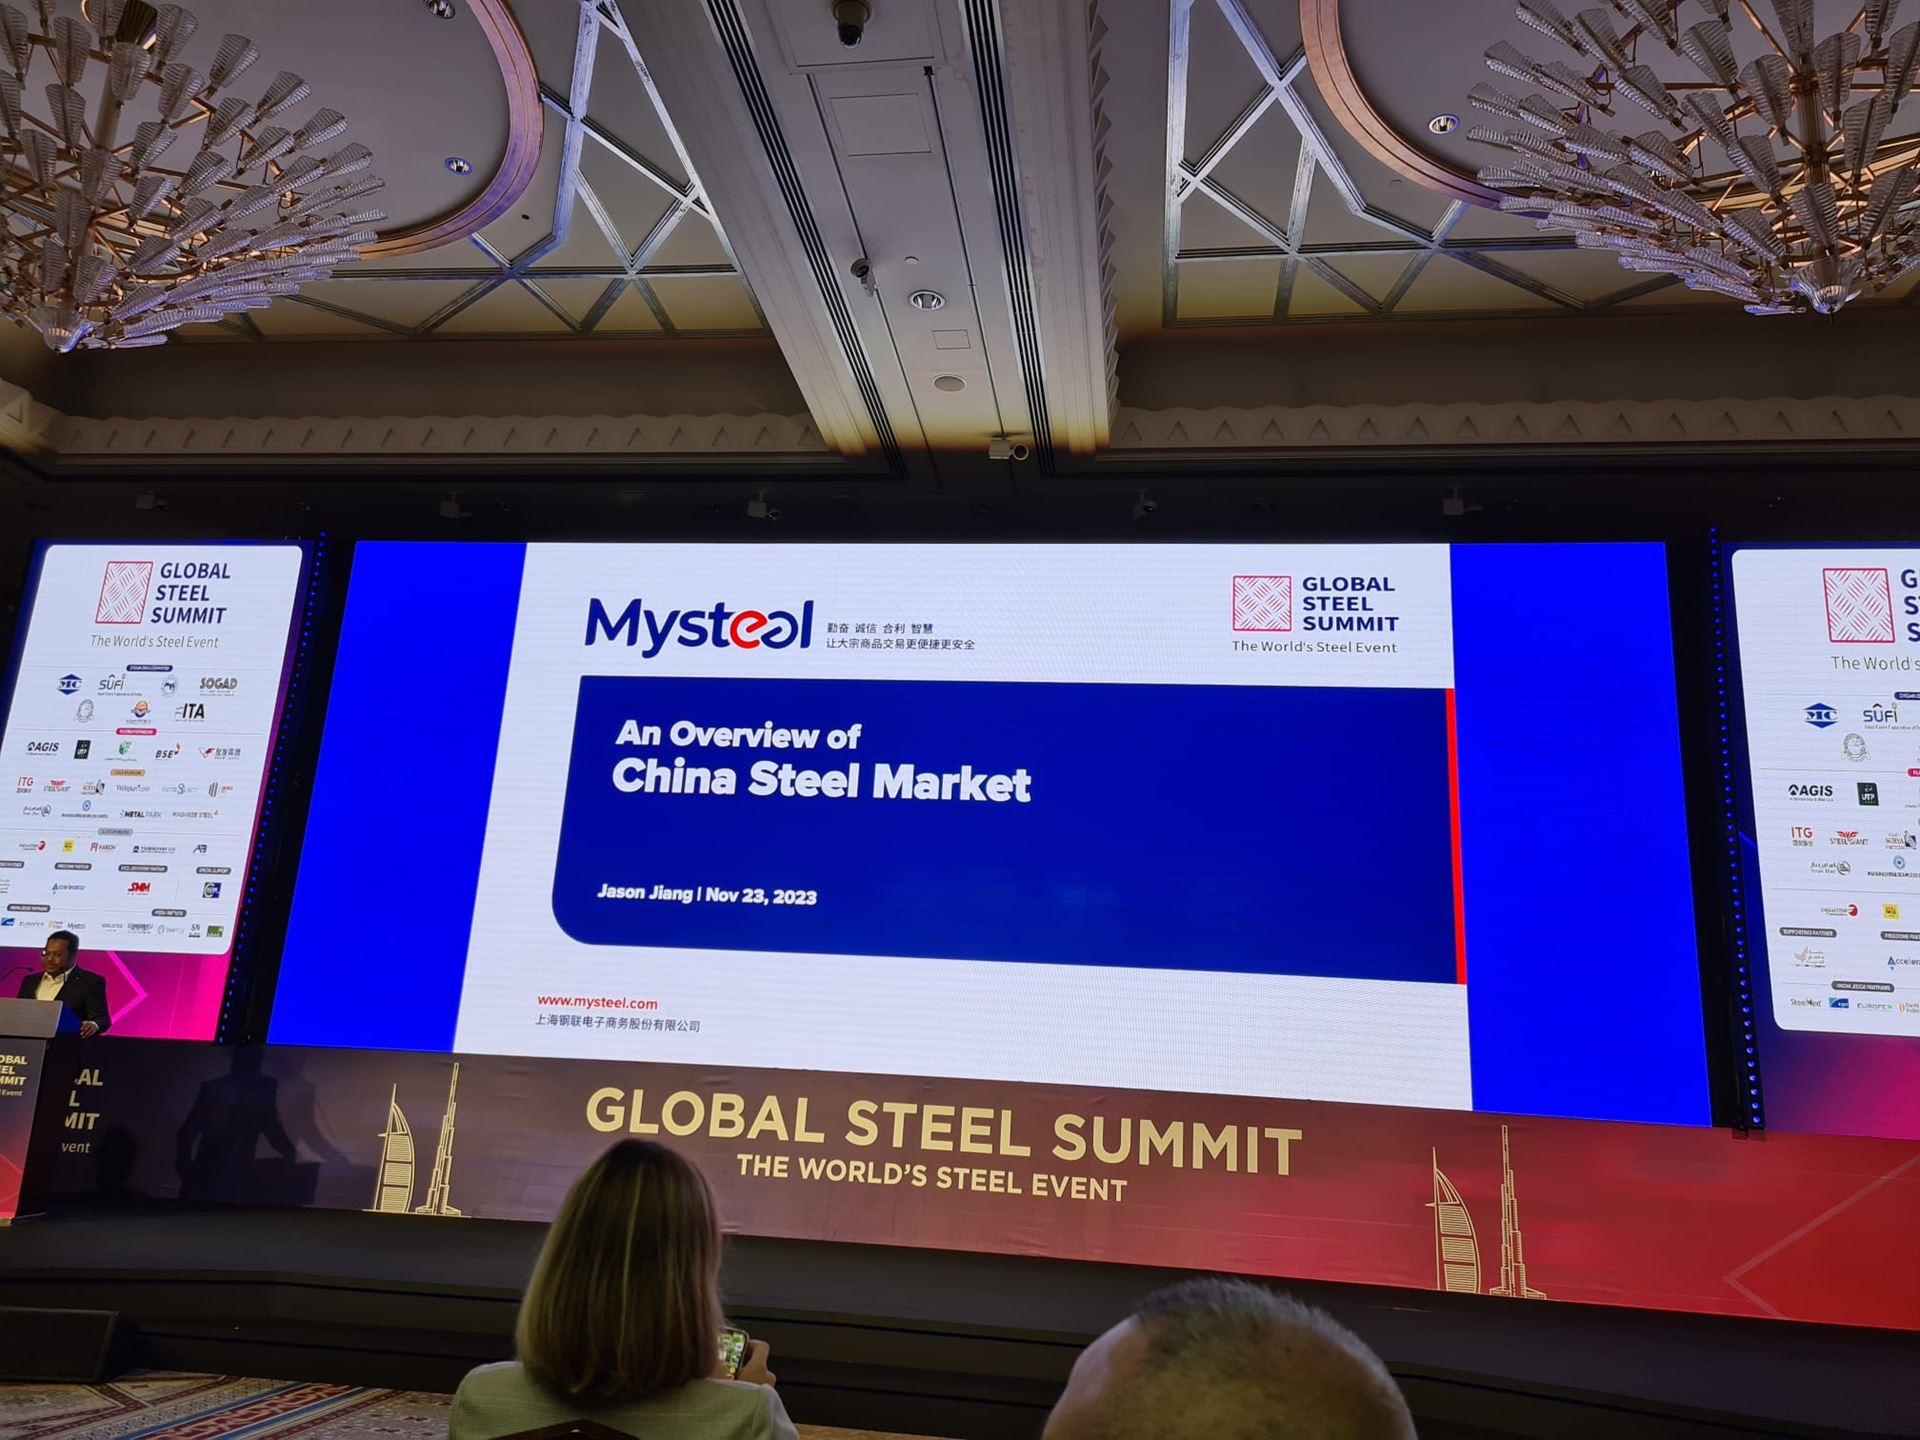 Jason Jiang, General Manager of Mysteel, gave an overview of the Chinese steel market at the Global Steel Summit